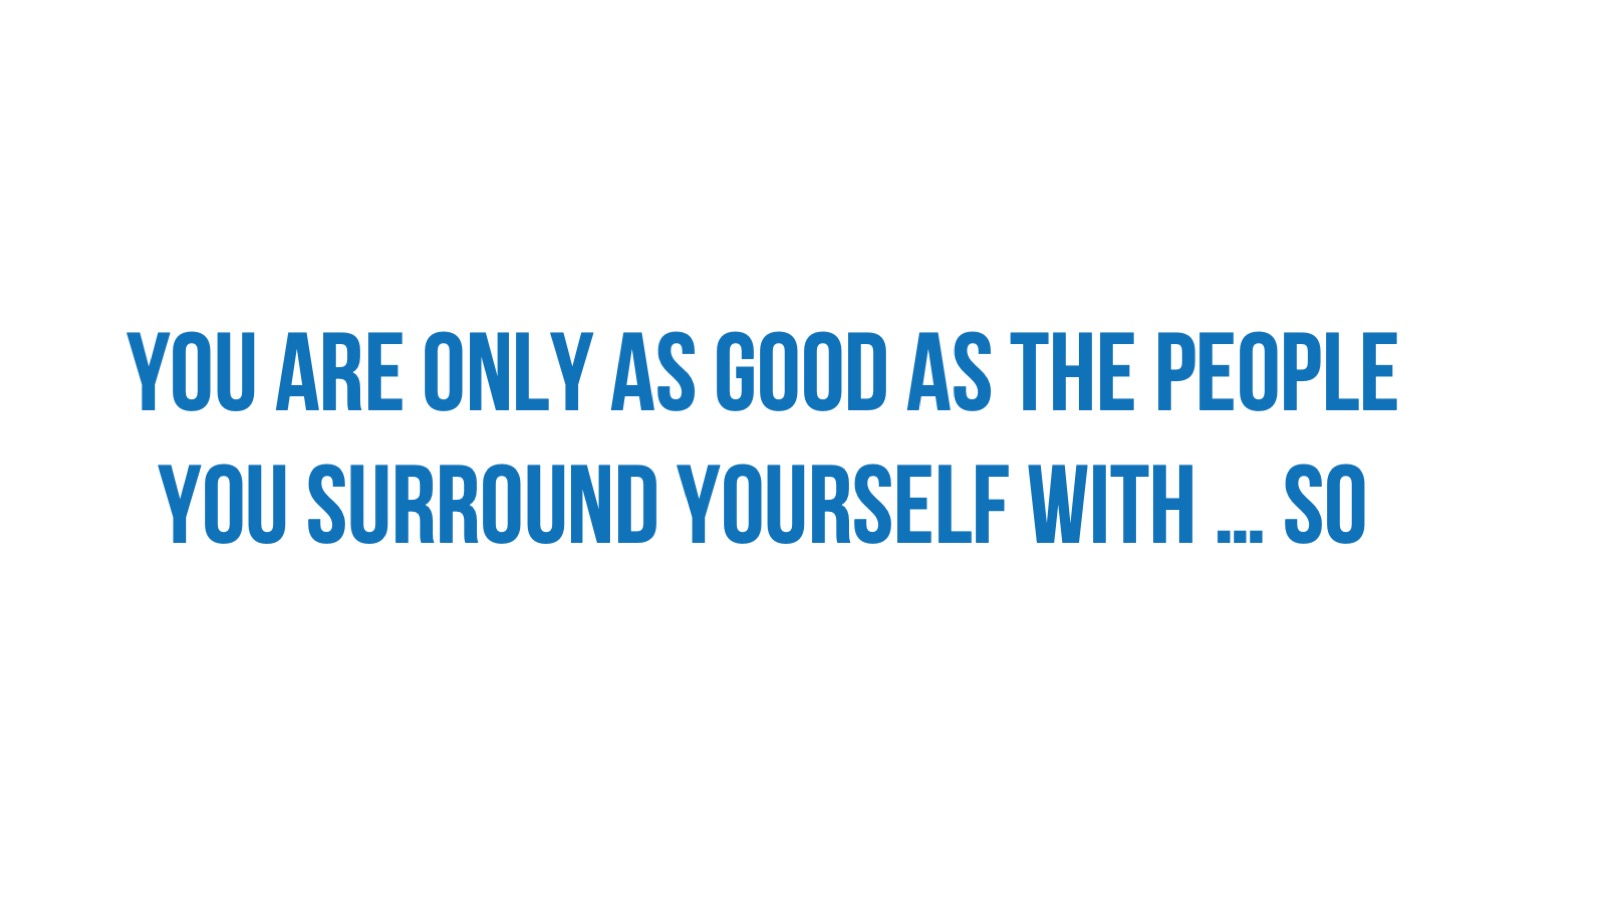 You are only as good as the people you surround yourself with